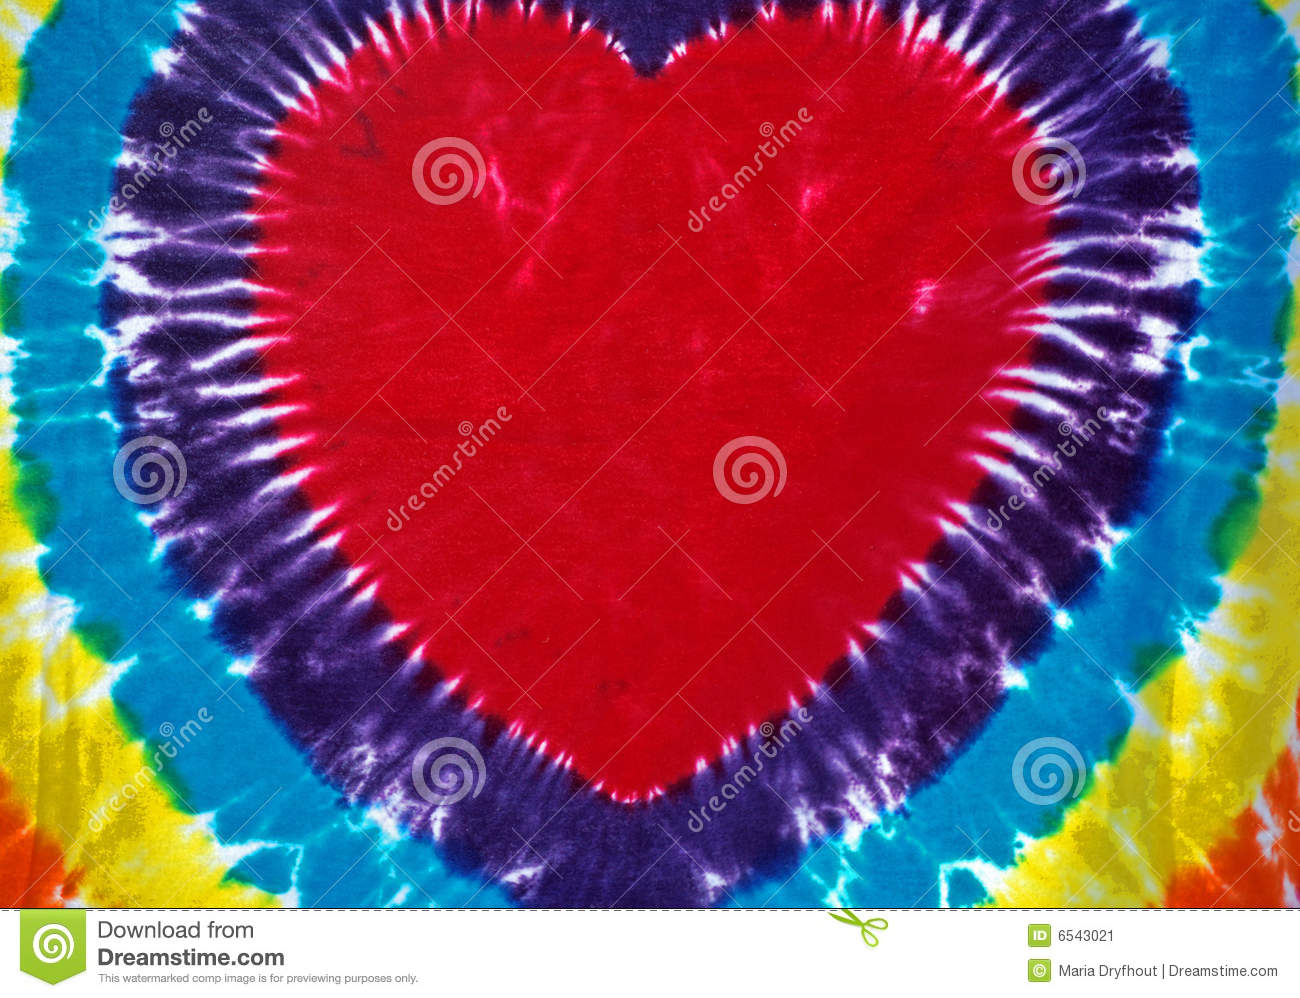 Tie Dyed Heart Stock Image   Image  6543021